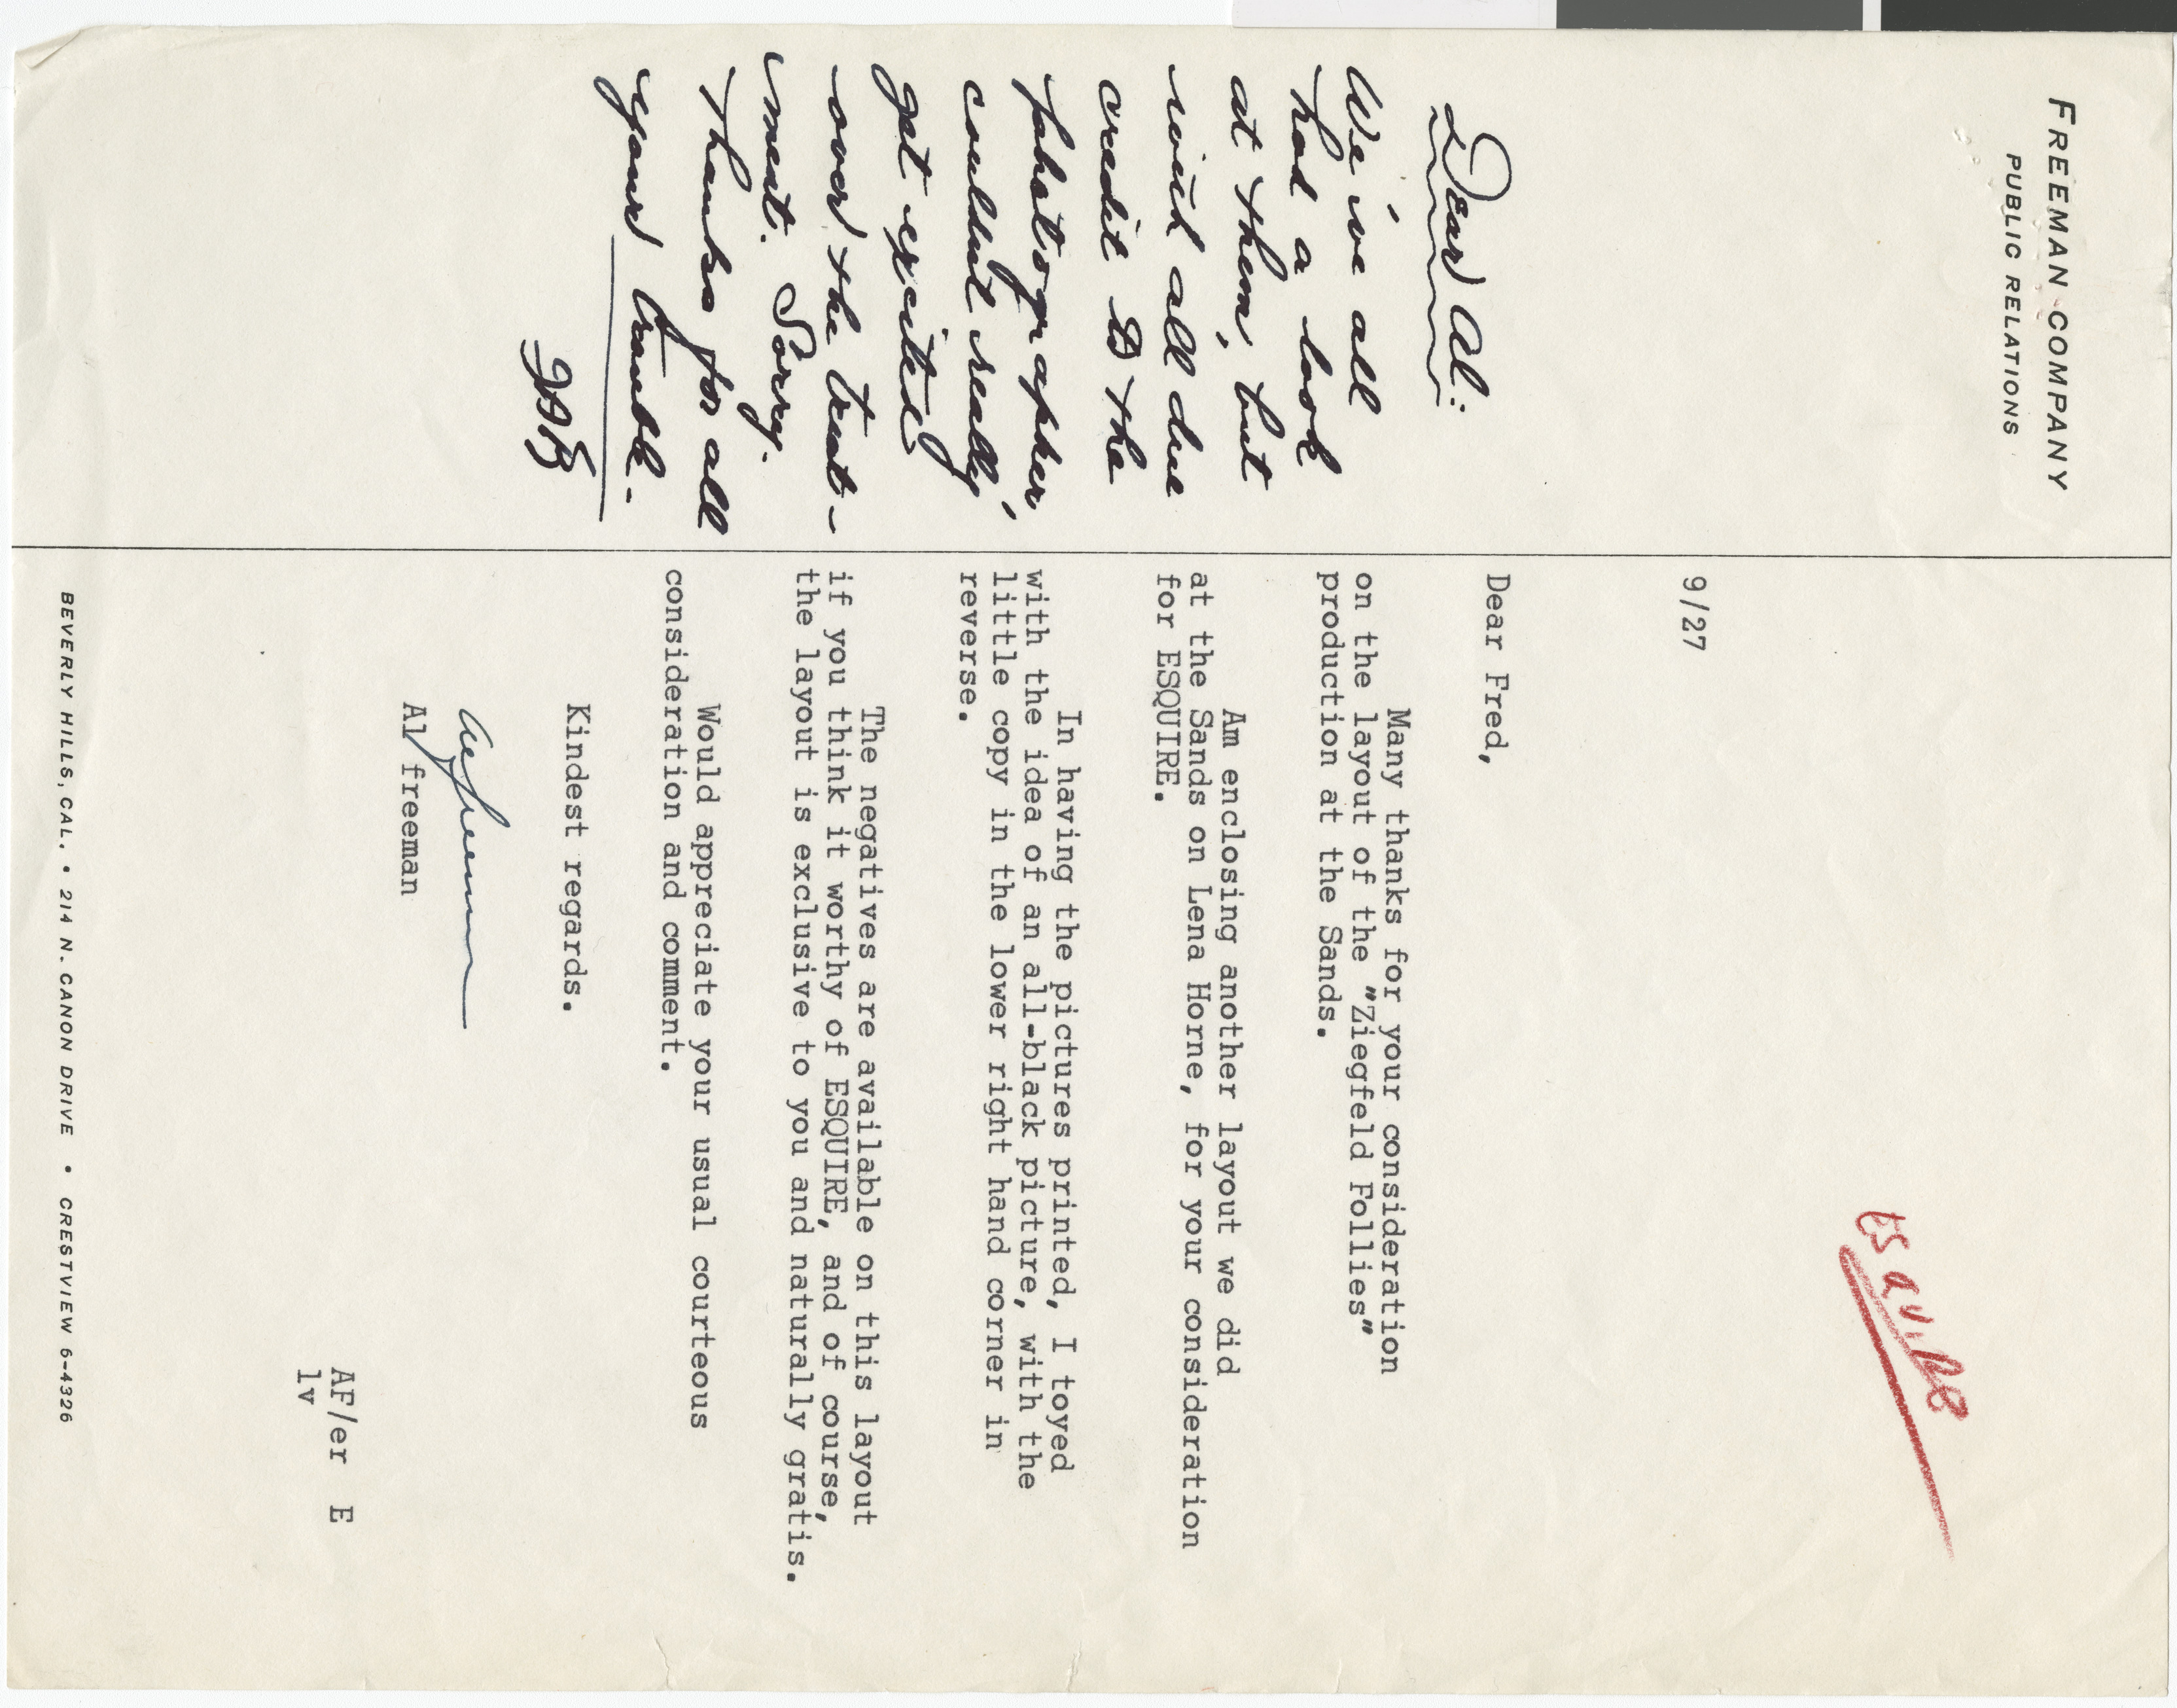 Correspondence from Al Freeman to "Fred" at Esquire magazine regarding a layout featuring Lena Horne, September 27 [1954?]